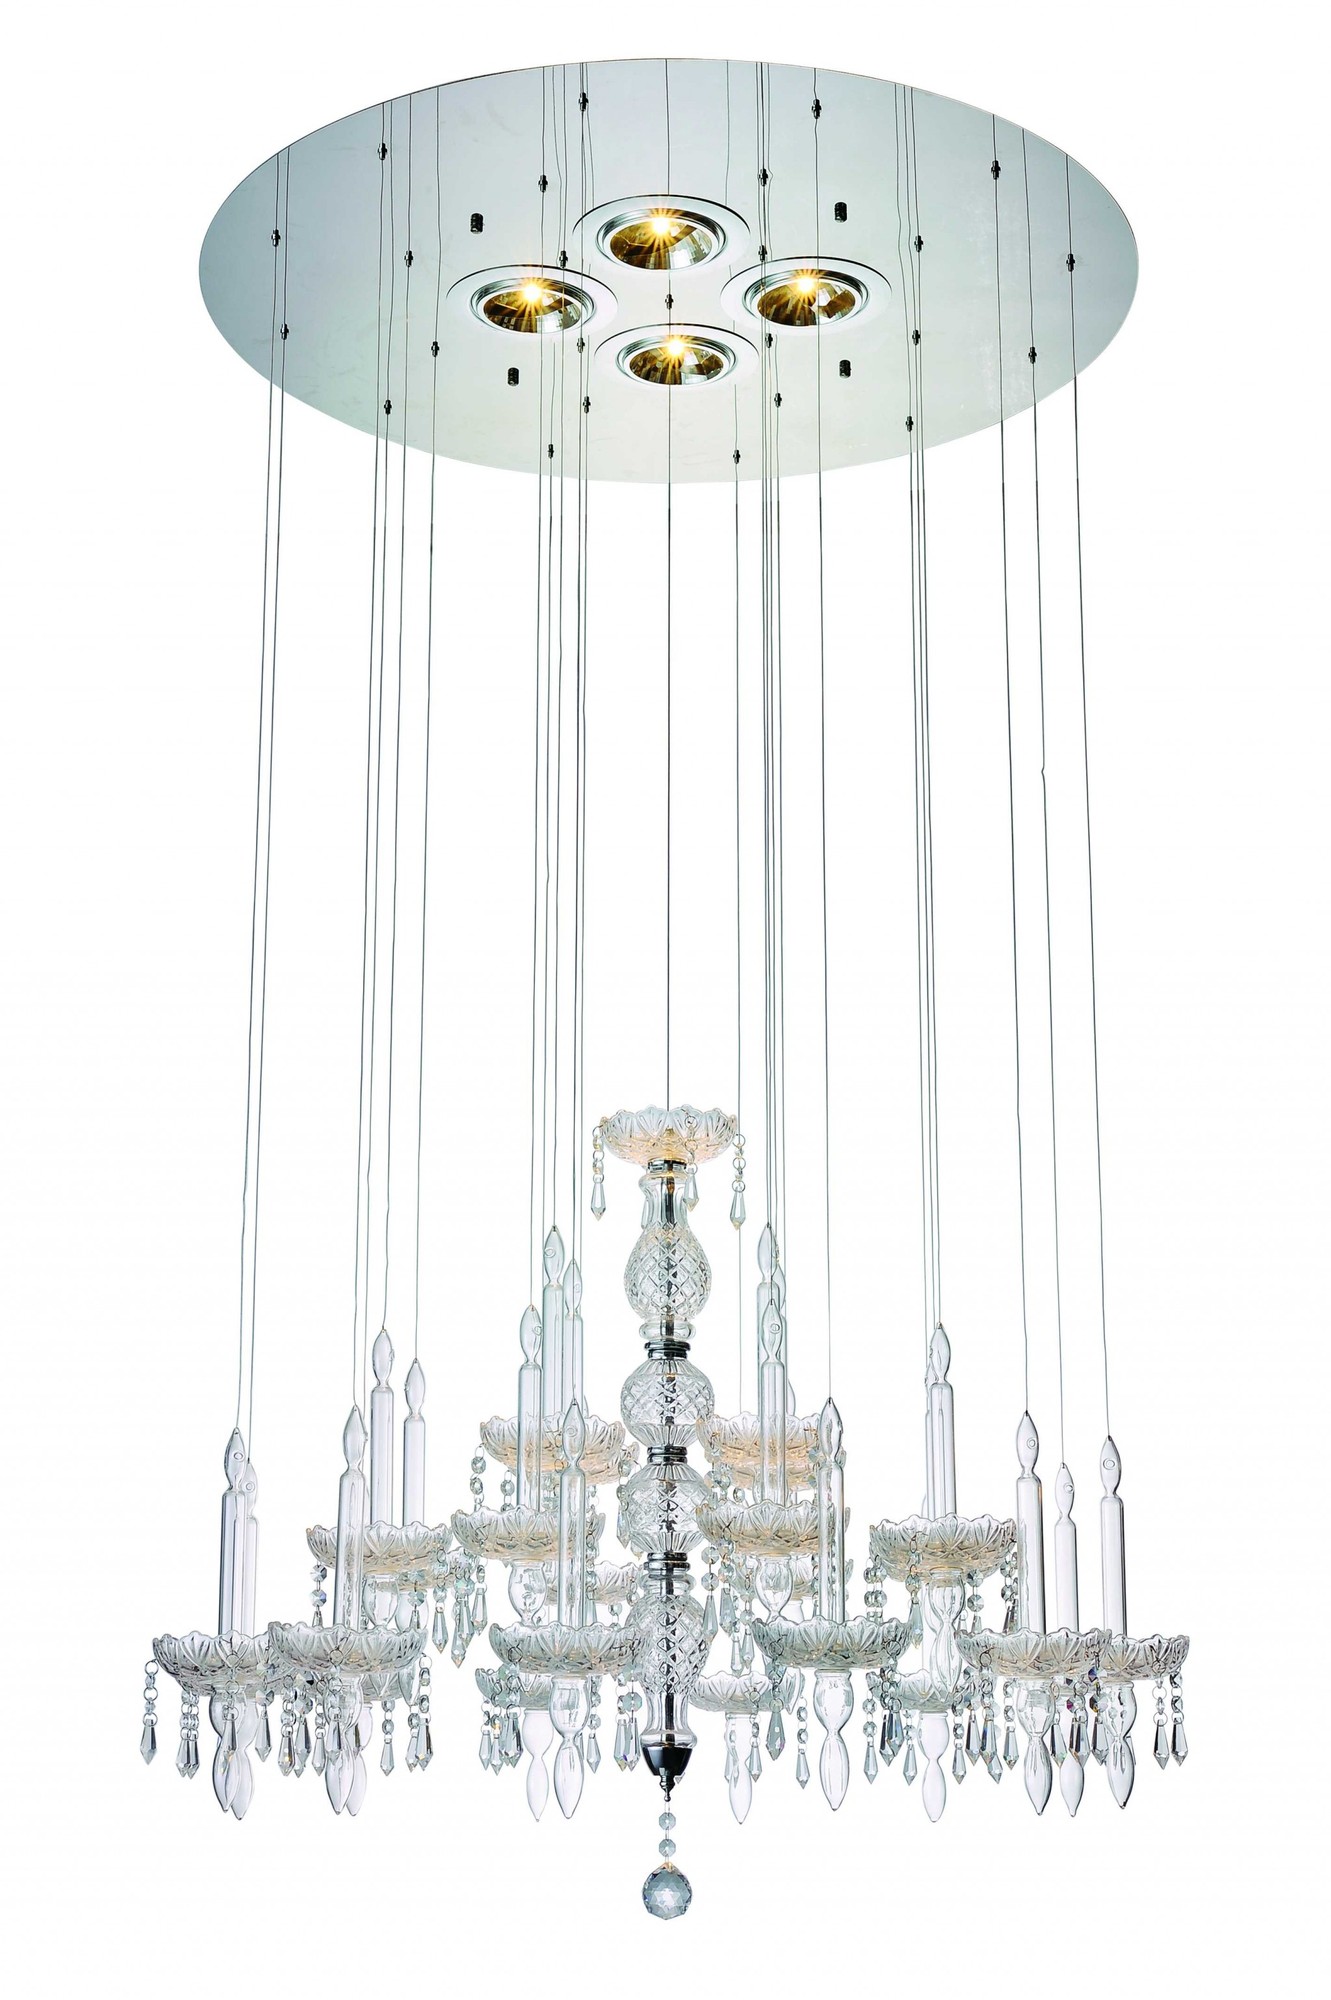 33" X 33" X 55" Clear Crystal Glass Pendant Lamp